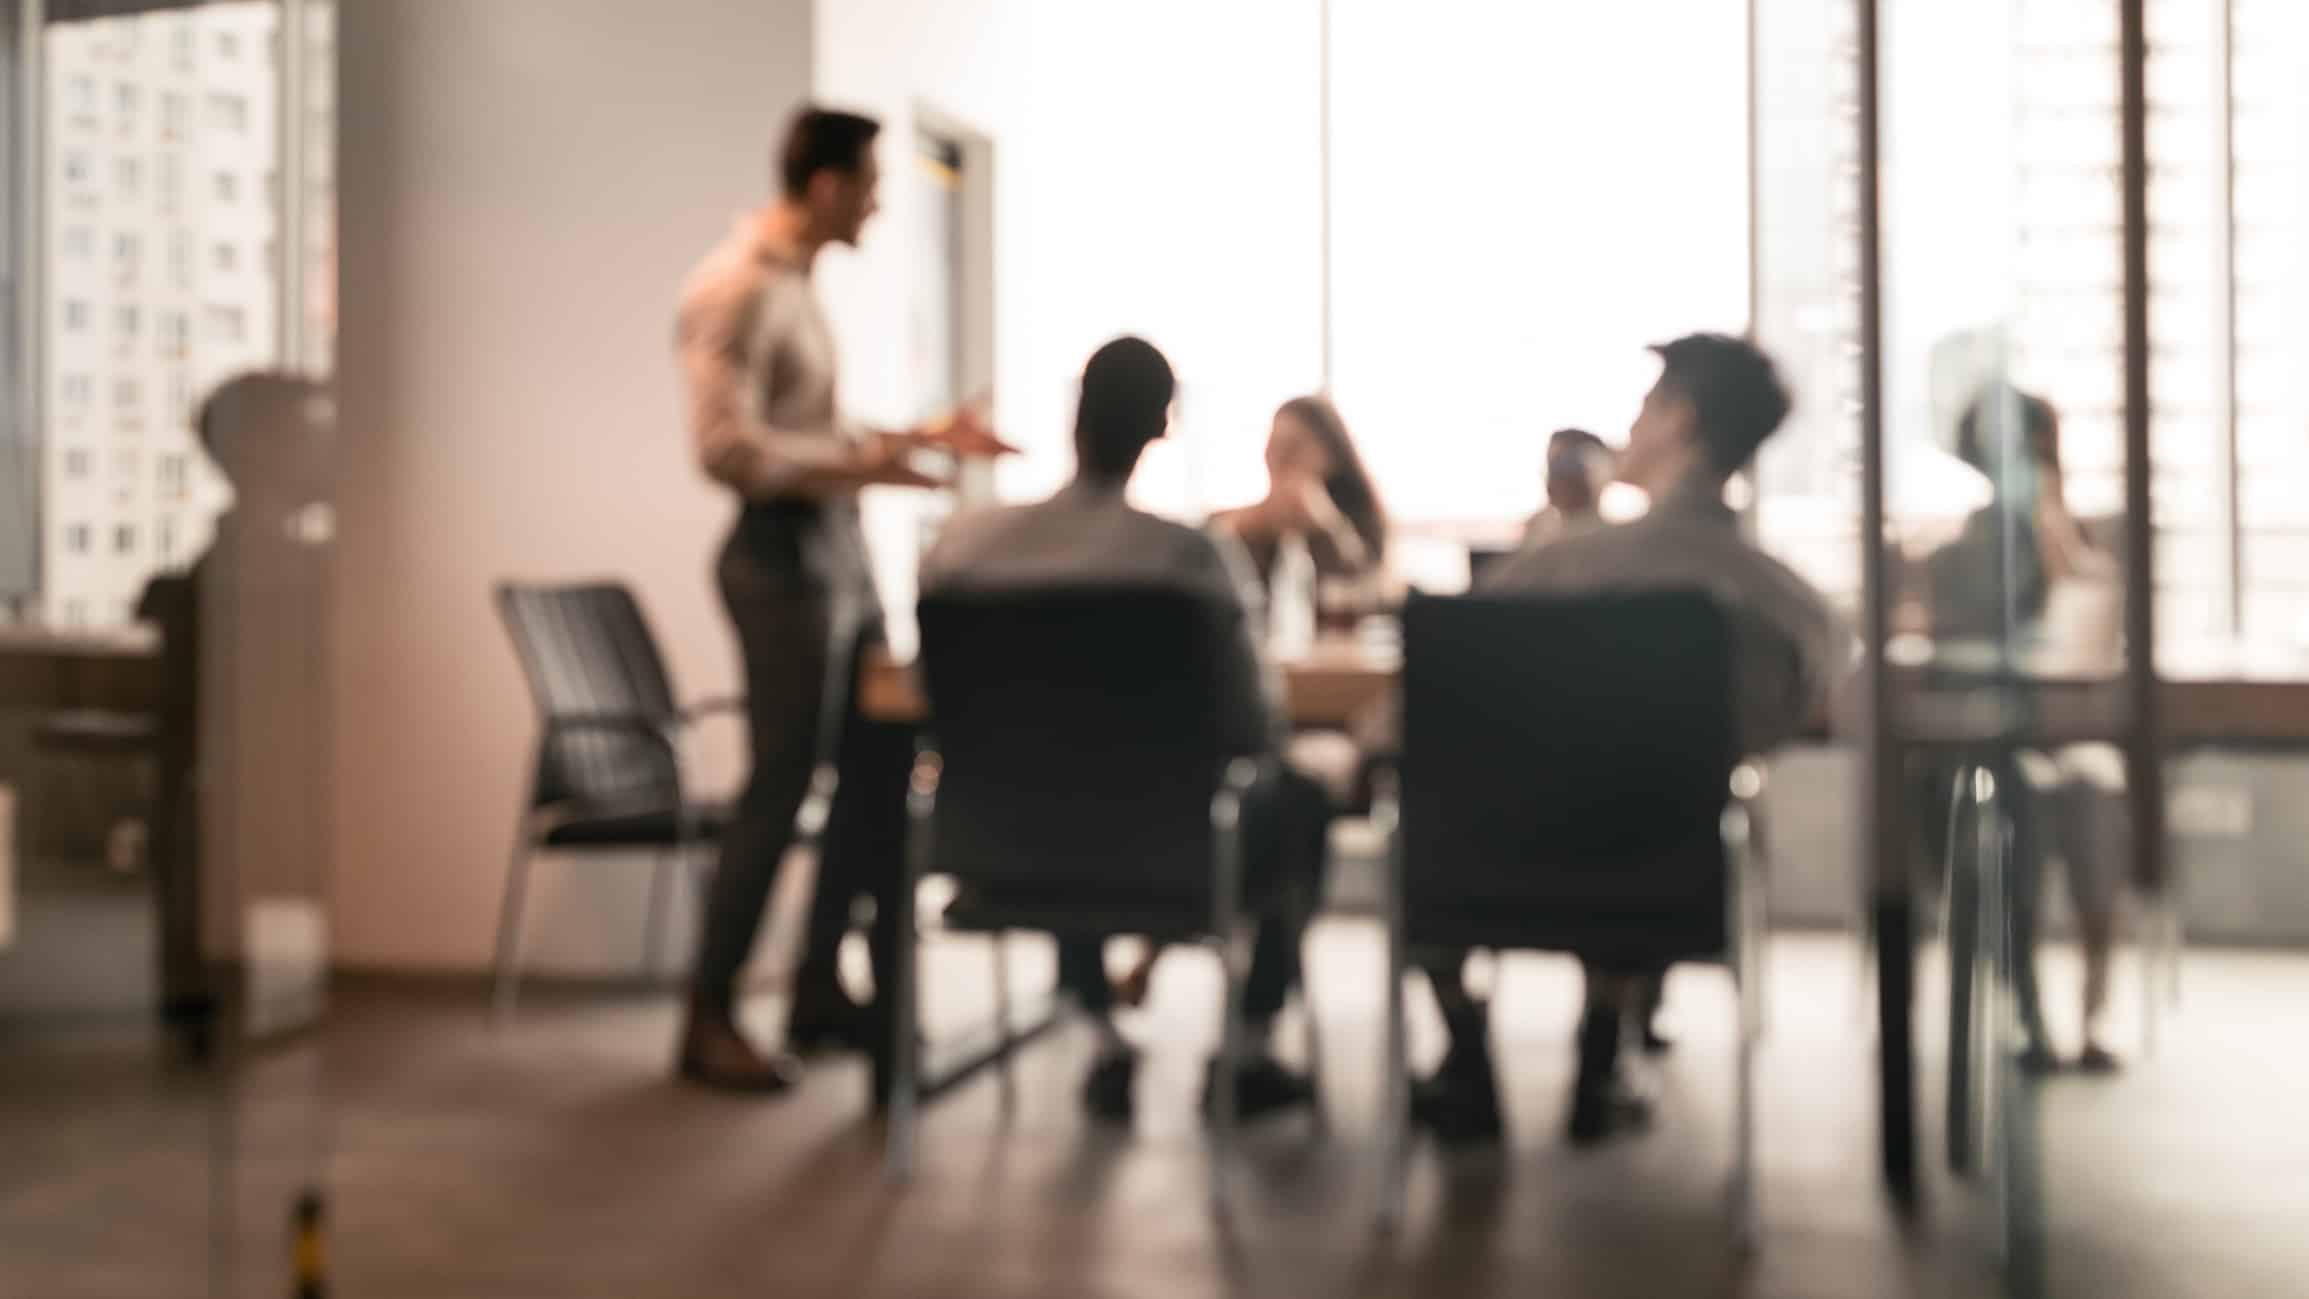 Colleagues having meeting in boardroom, businessman giving speech, blurred photo. ISO 44001 promotes collaborative business relationships.